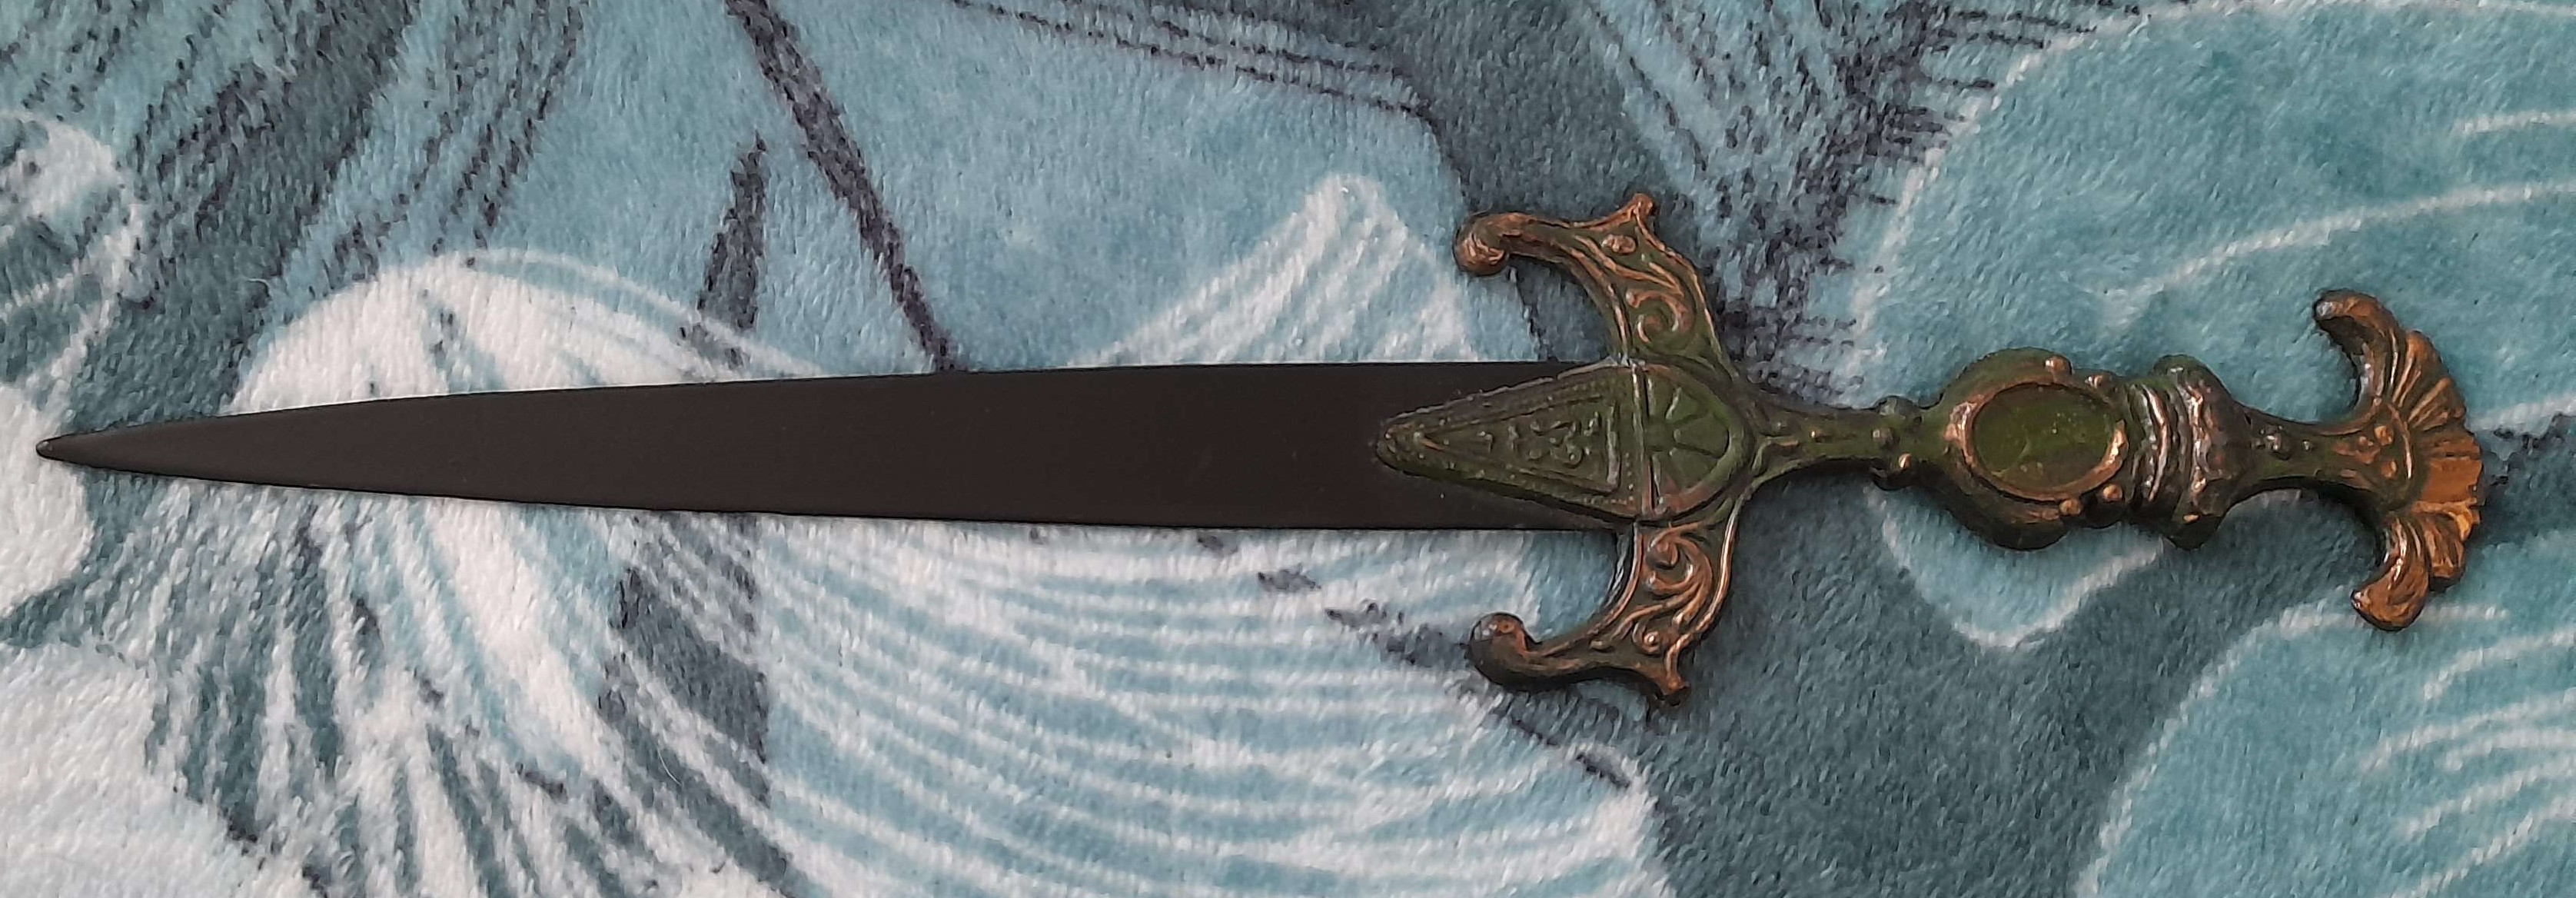 a very cool and ornate looking envelope opener. the blunt blade is black and the handle is dark green with bits of gold